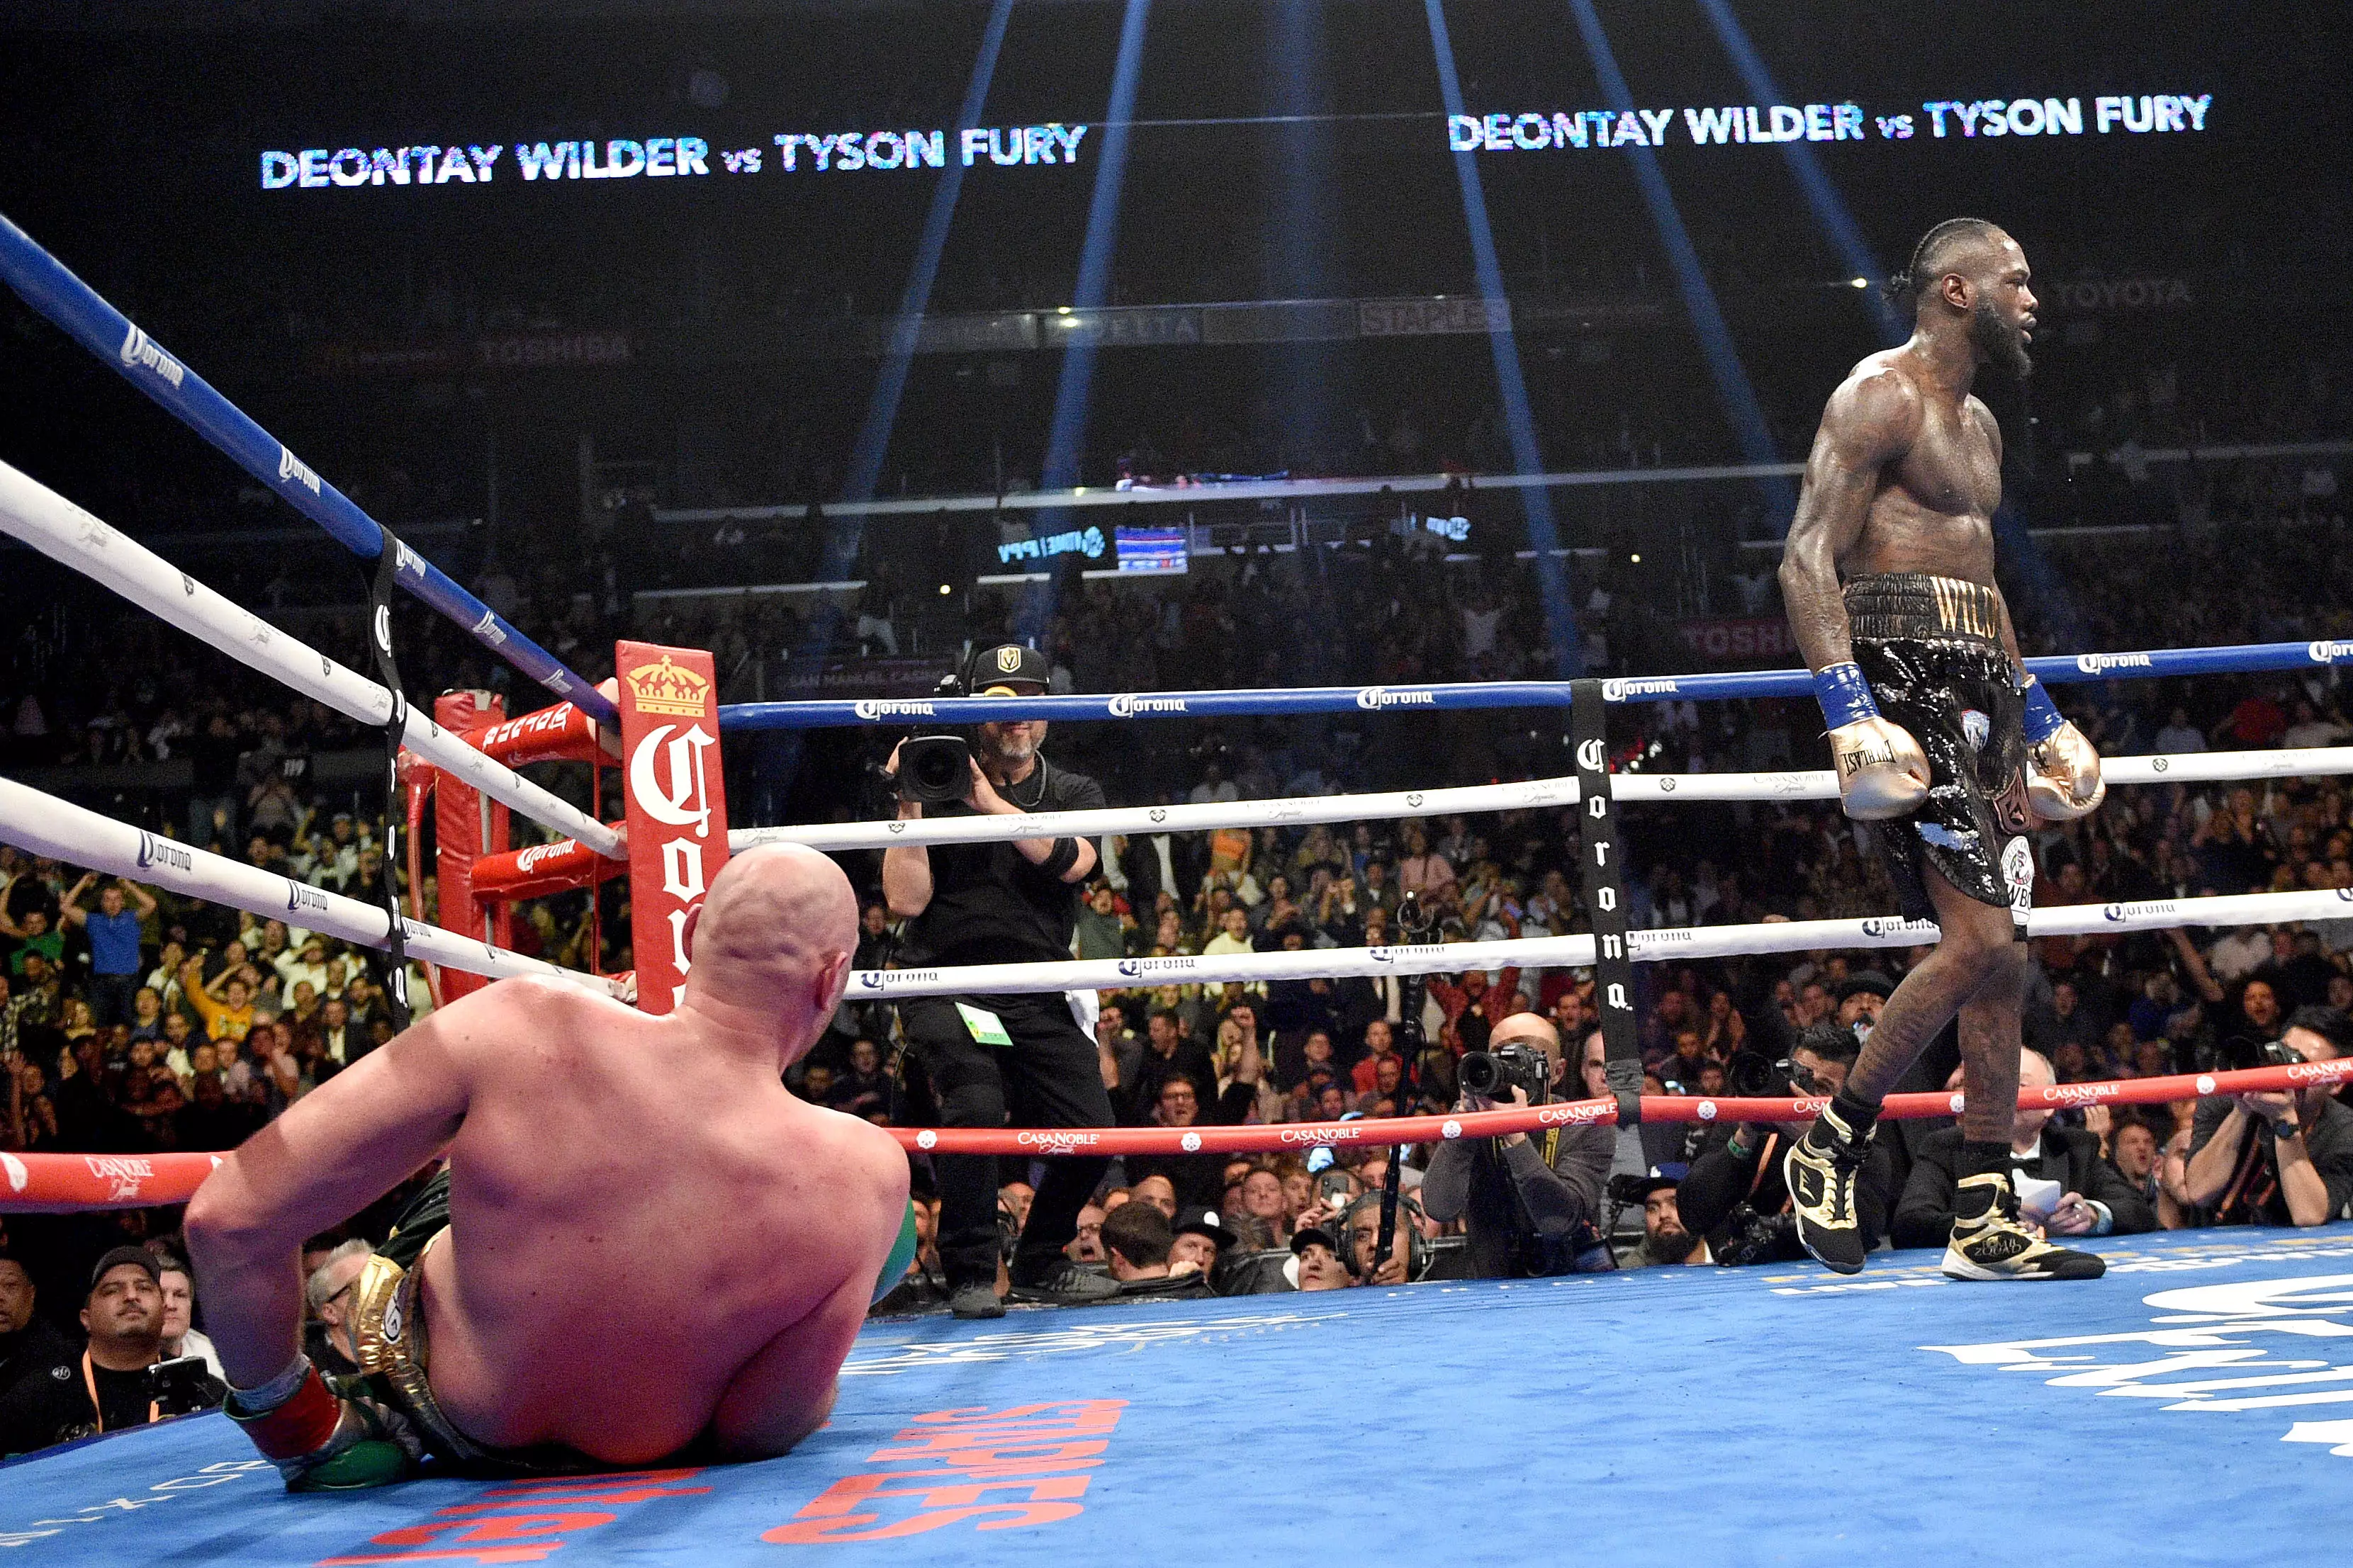 Wilder walks away after knocking Fury to the canvas in the 12th round. Image: PA Images